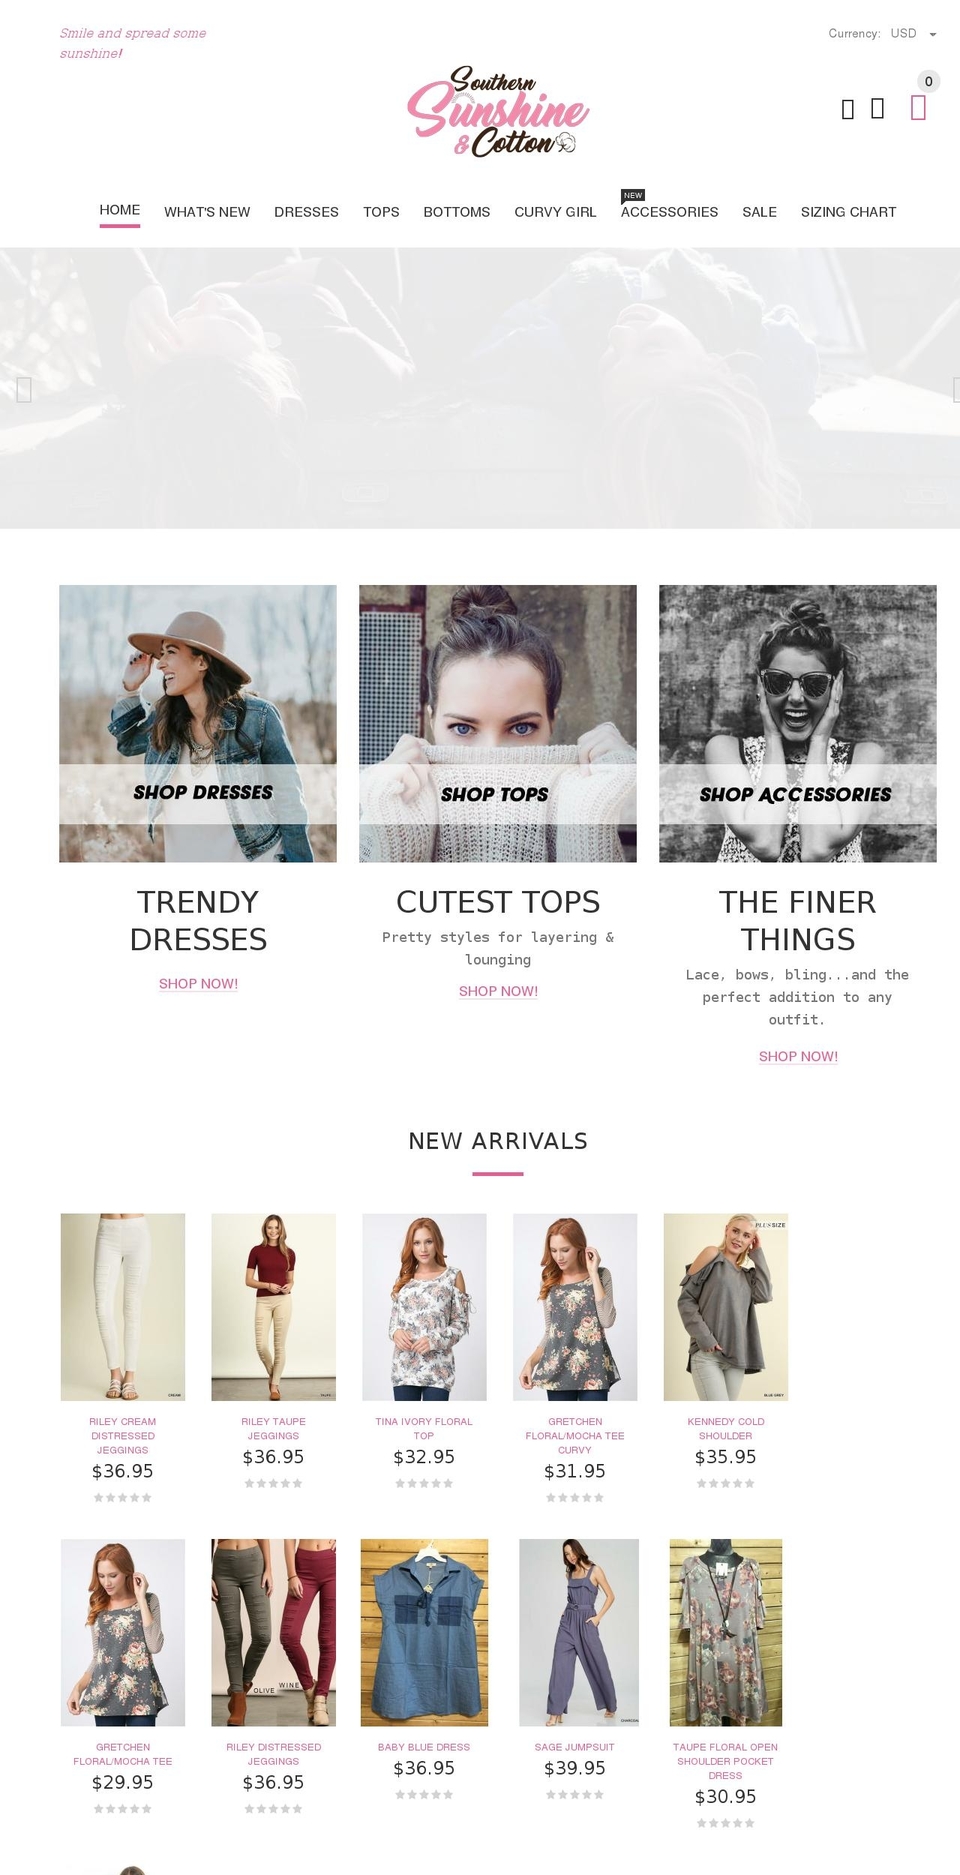 yourstore-v2-1-3 Shopify theme site example sunshineandcotton.com